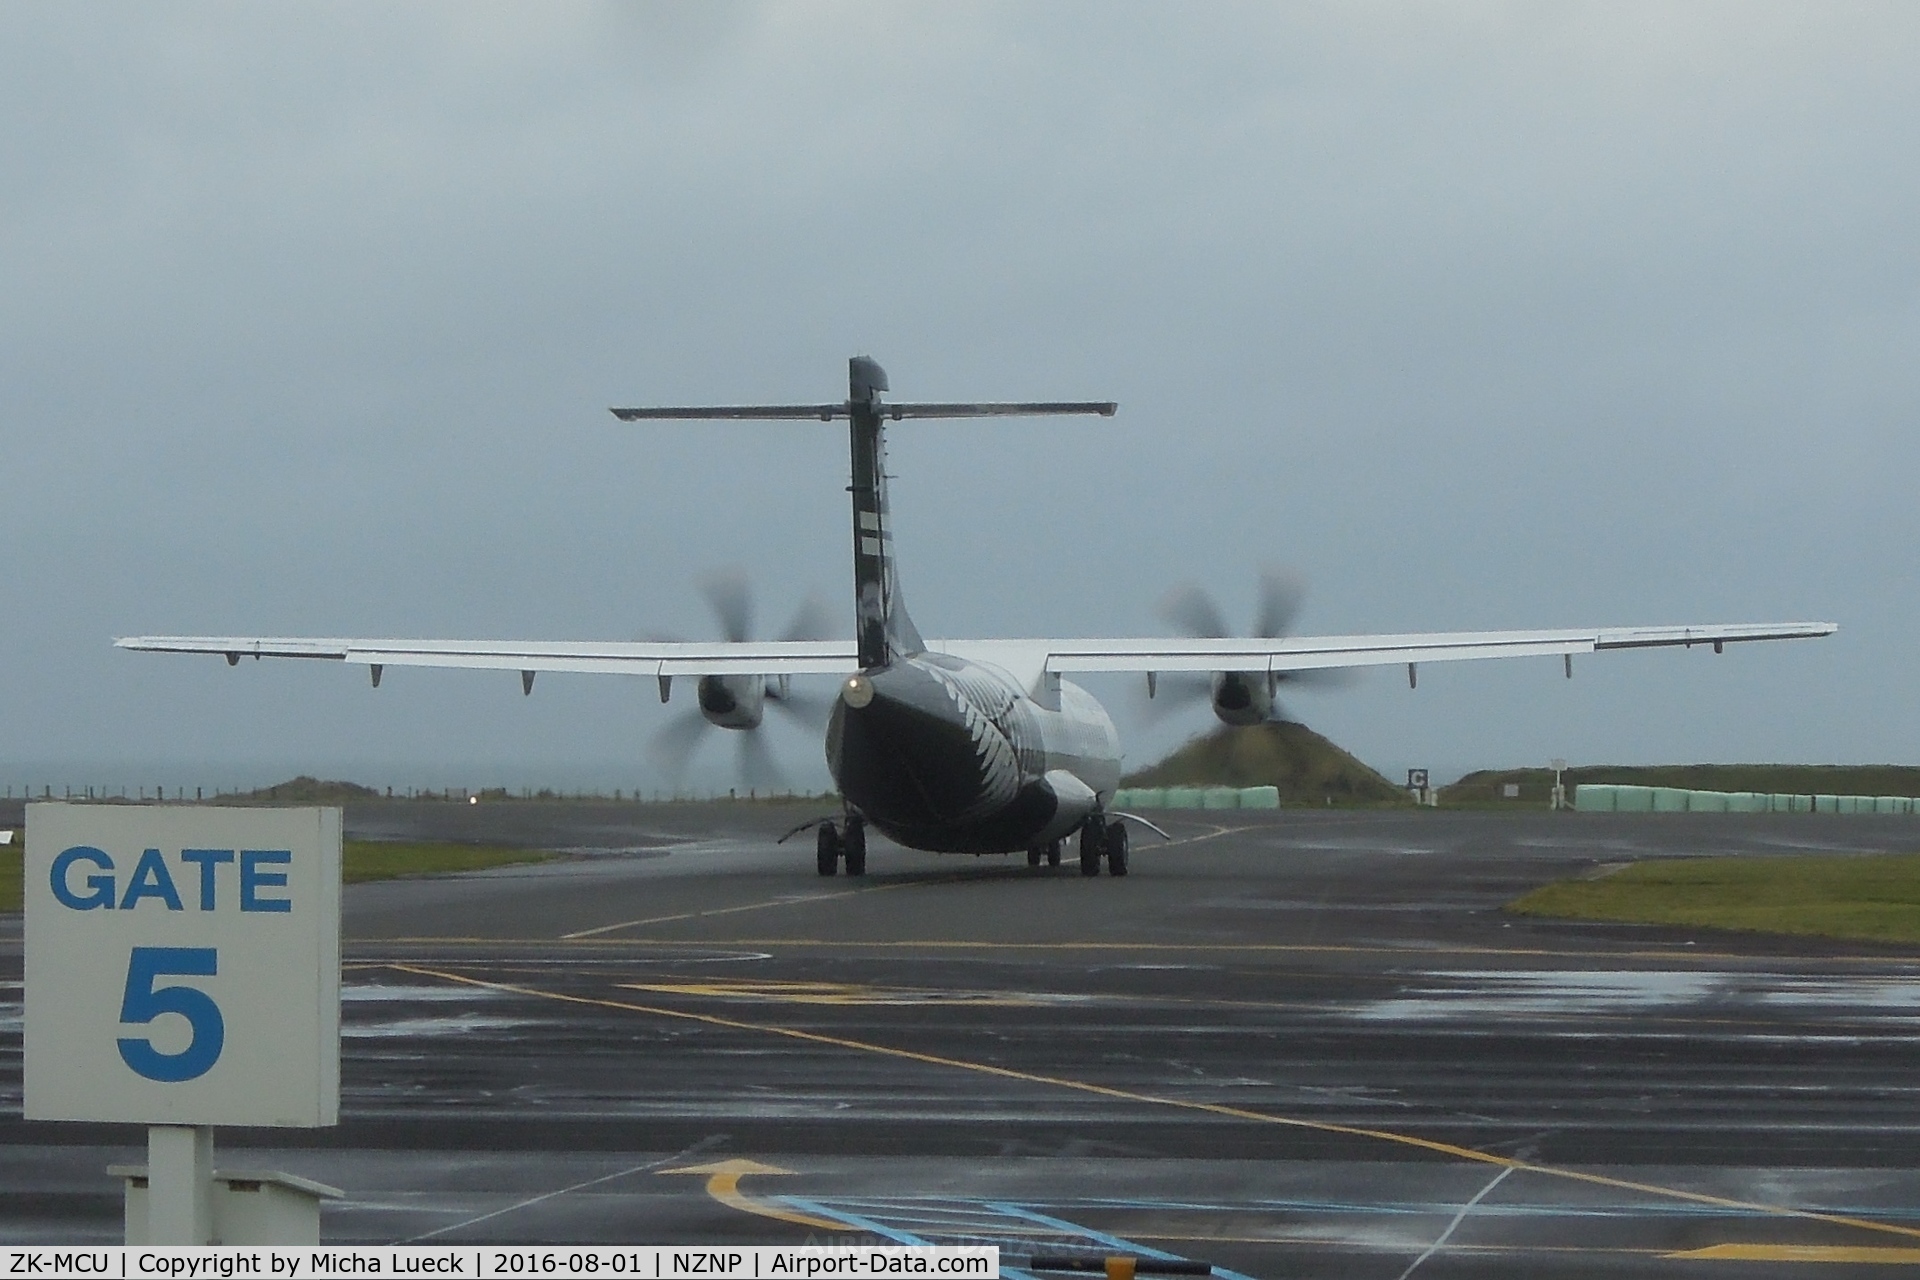 ZK-MCU, 2000 ATR 72-212A C/N 632, A rainy day in New Plymouth